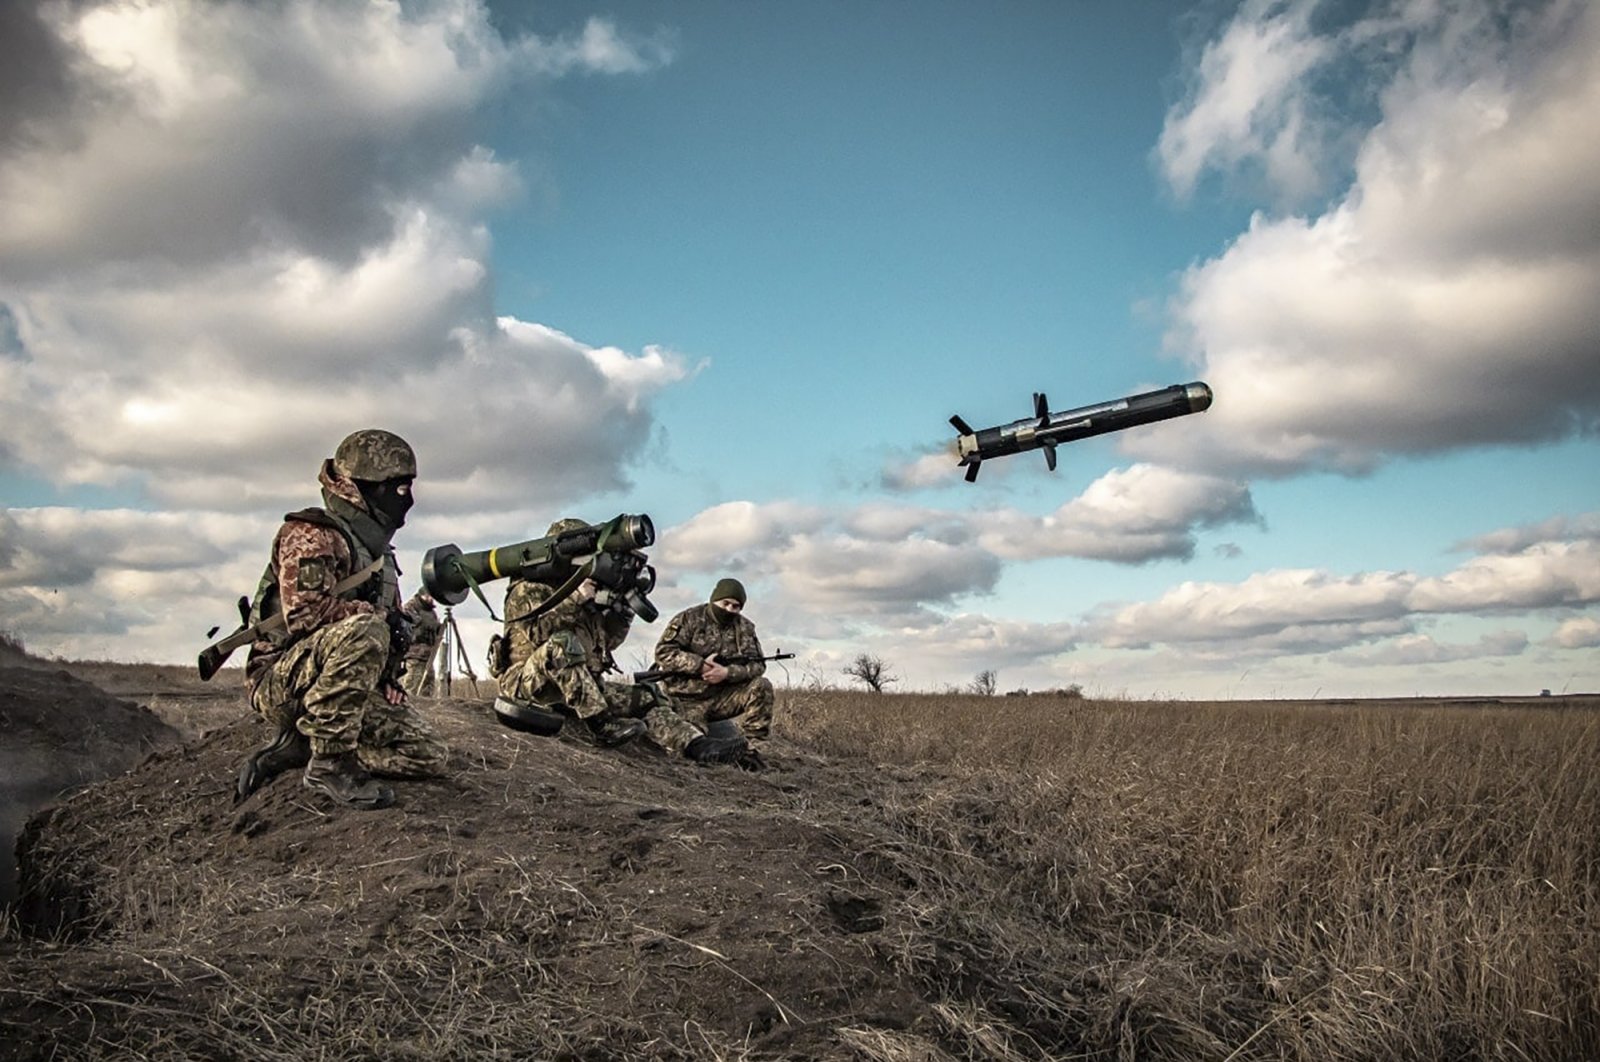 Ukrainian soldiers use a launcher with U.S. Javelin missiles during military exercises in the Donetsk region, Ukraine, Dec. 23, 2021. (AP Photo)